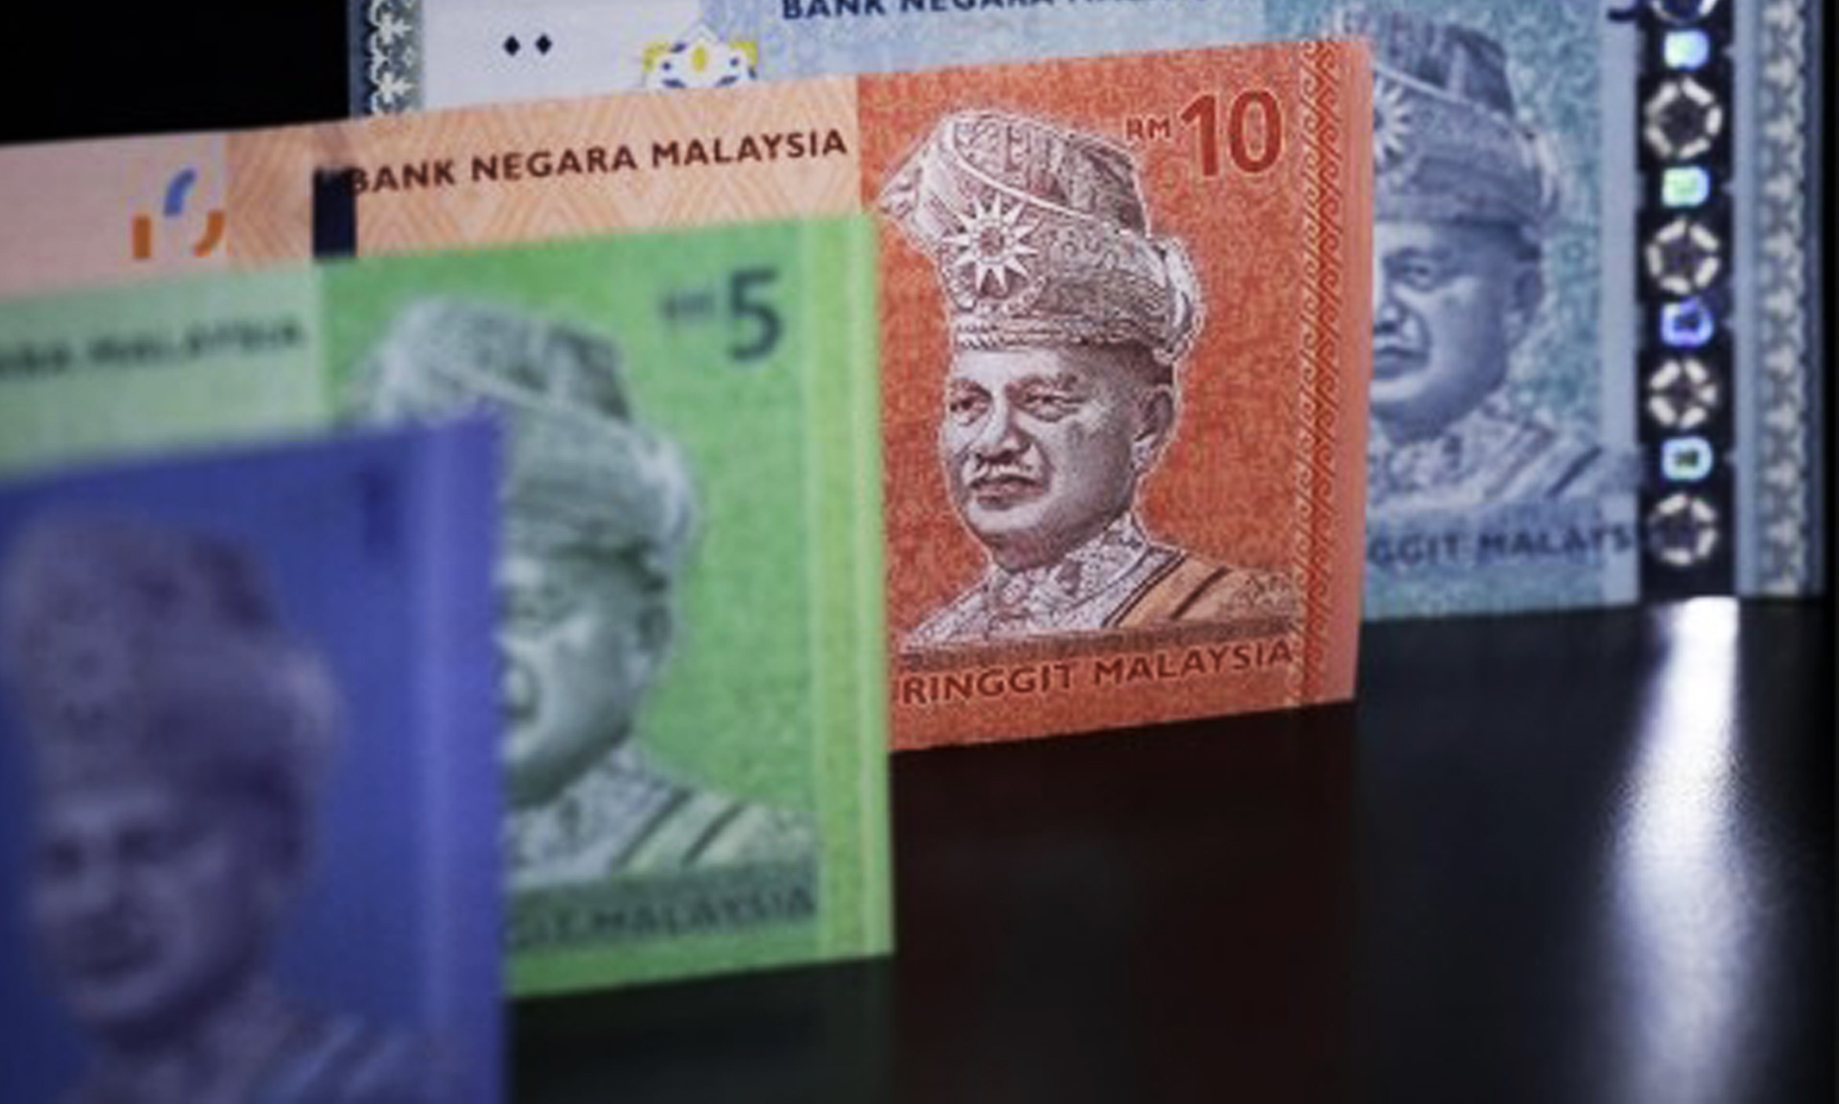 Singapore, Malaysia added to US watchlist on currency practices